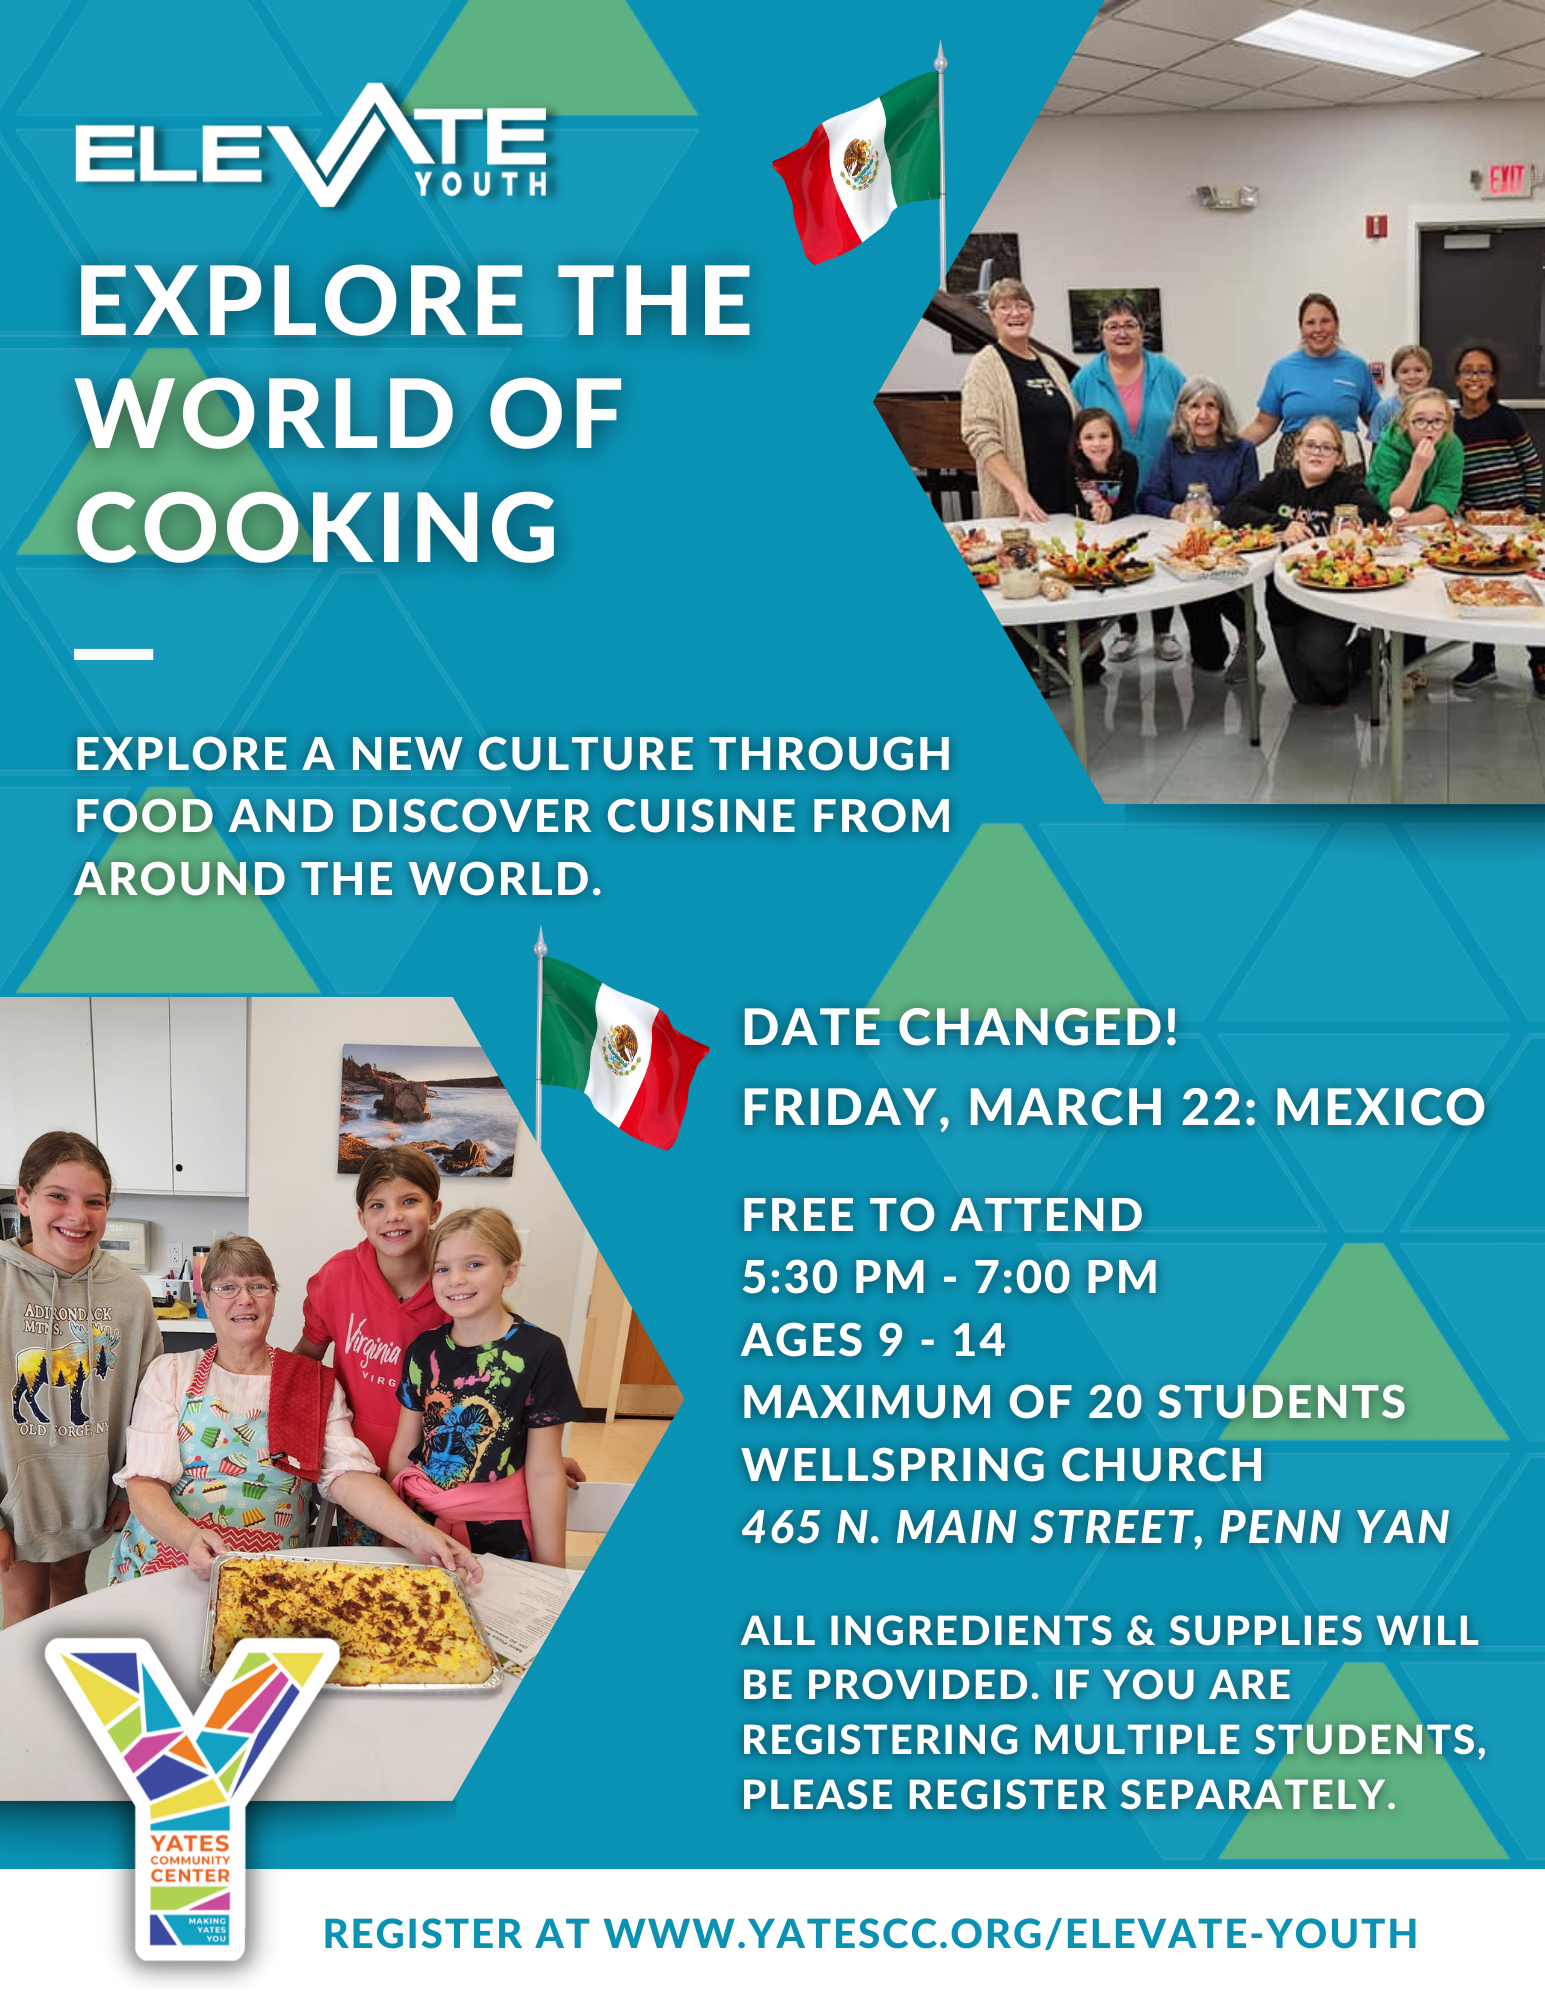 Yates Community Center's ELEVATE Youth Explore the World of Cooking